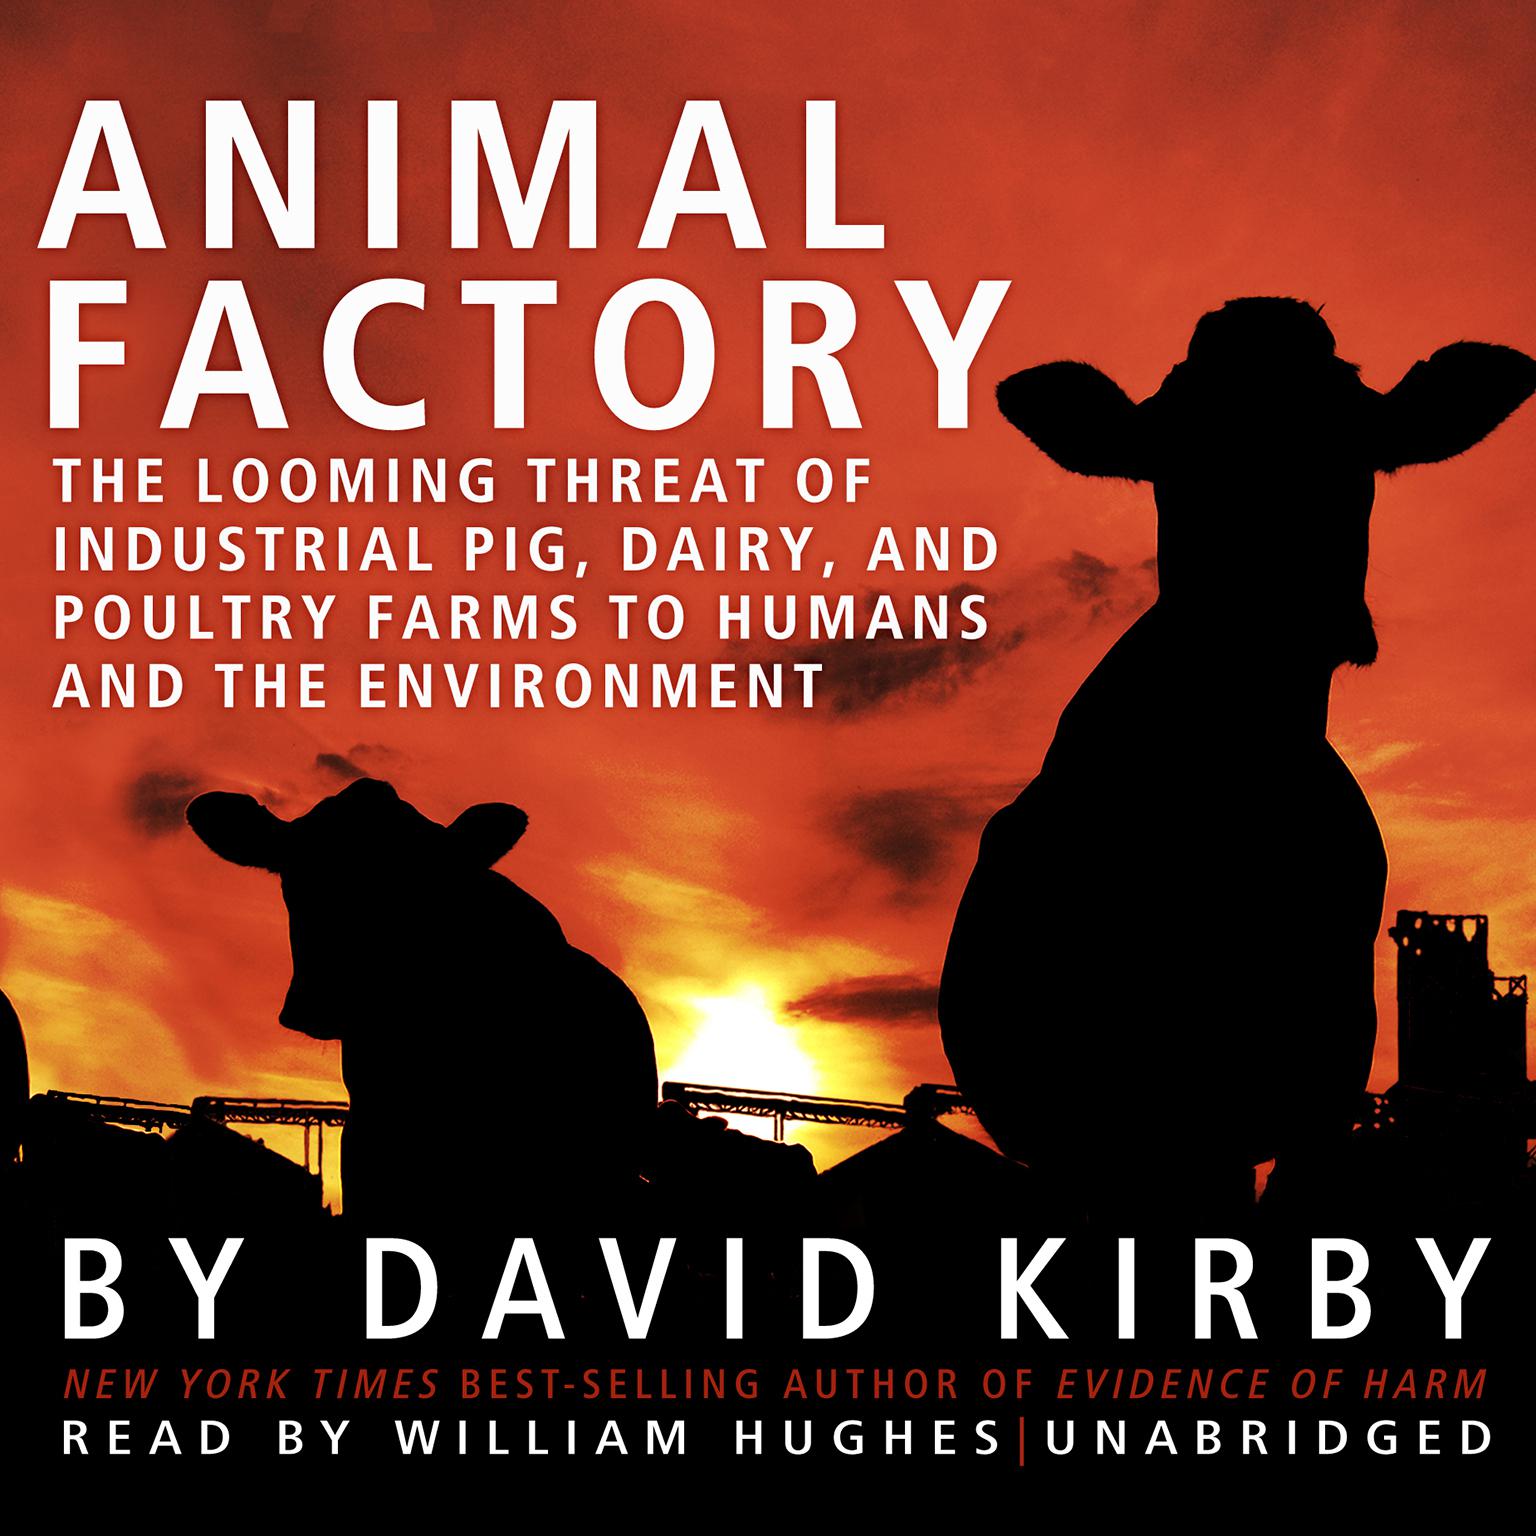 Animal Factory: The Looming Threat of Industrial Pig, Dairy, and Poultry Farms to Humans and the Environment Audiobook, by David Kirby